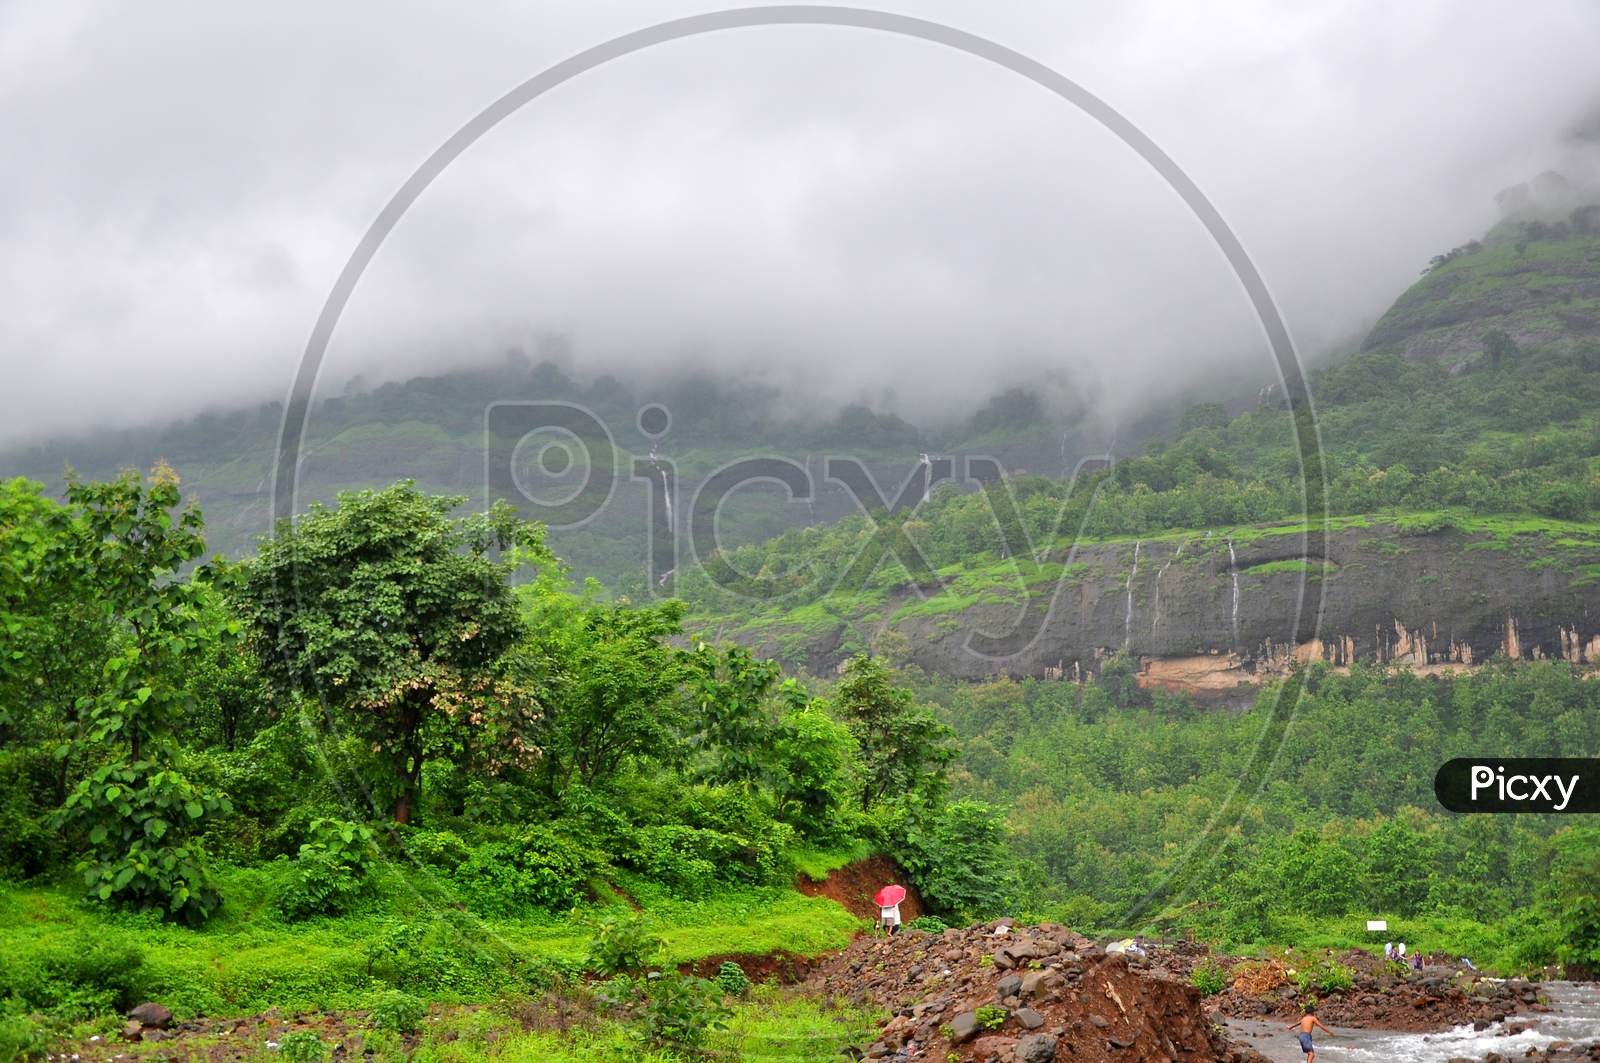 The Mountain Covered With Clouds In The Monsoon